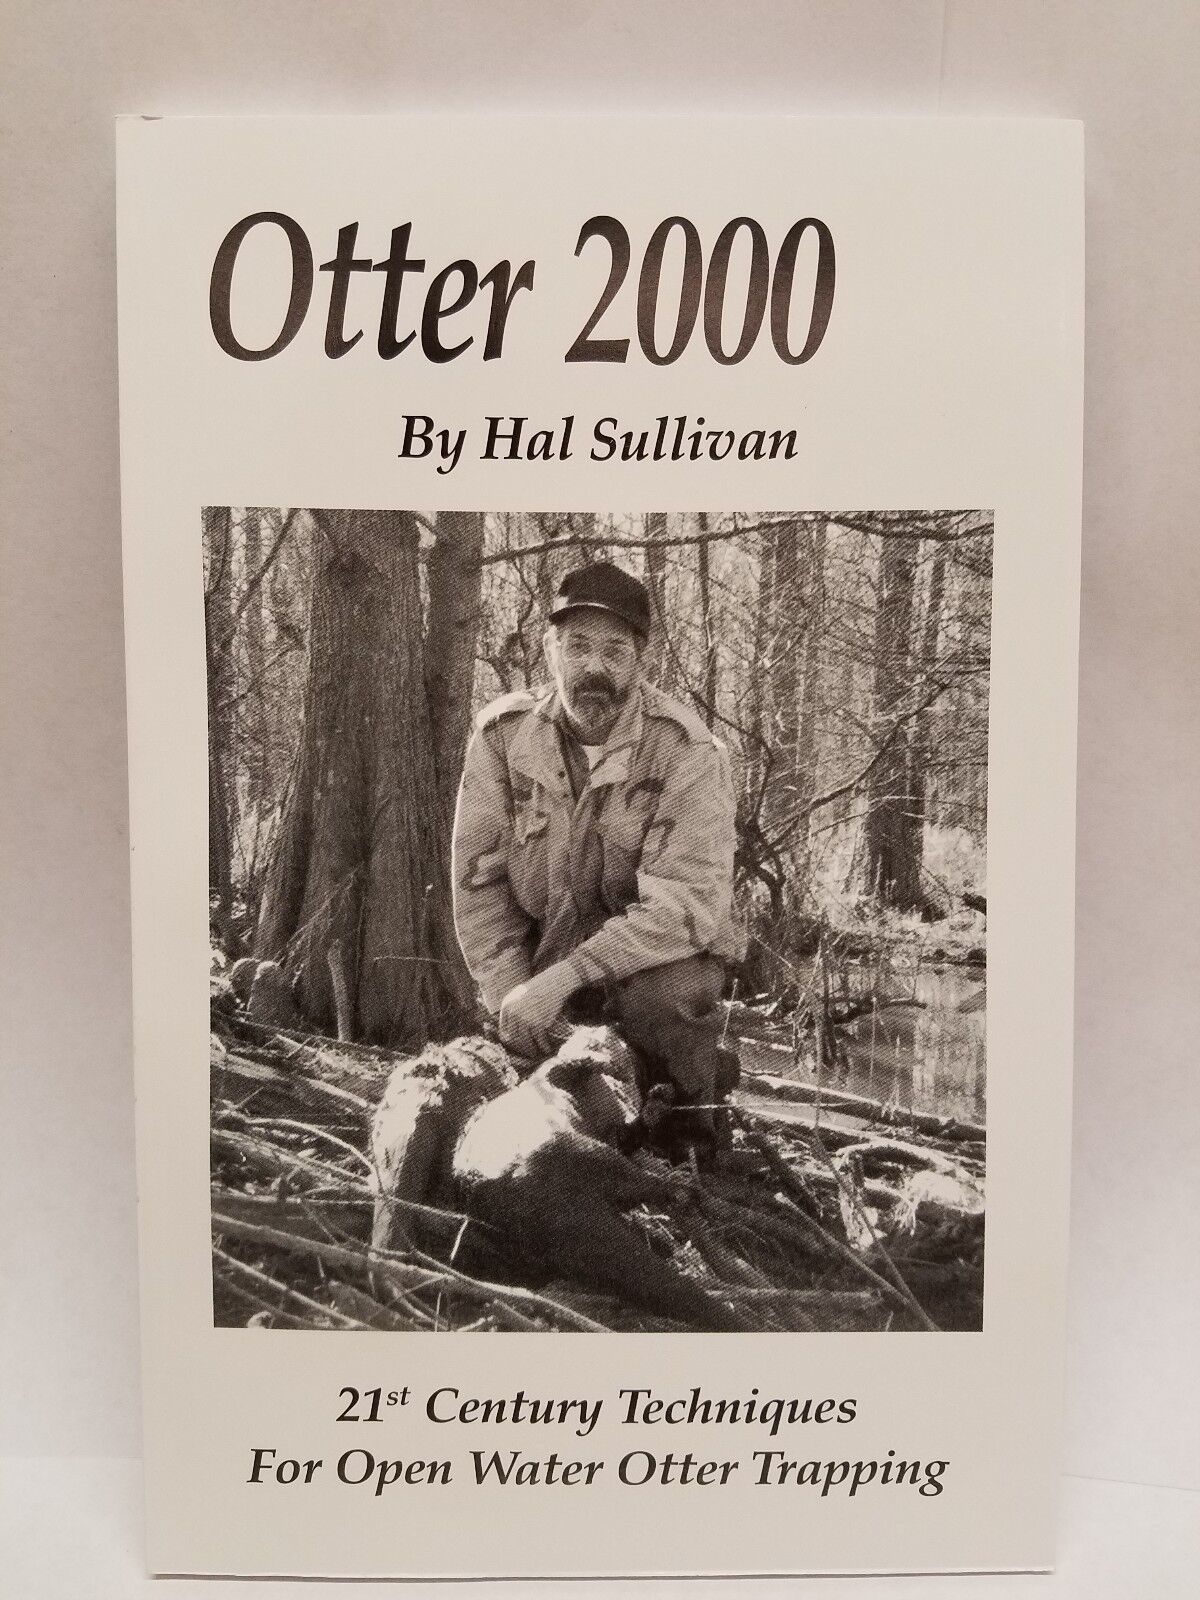 Primary image for Book "Otter 2000" By Hal Sullivan Traps Trapping Open Water